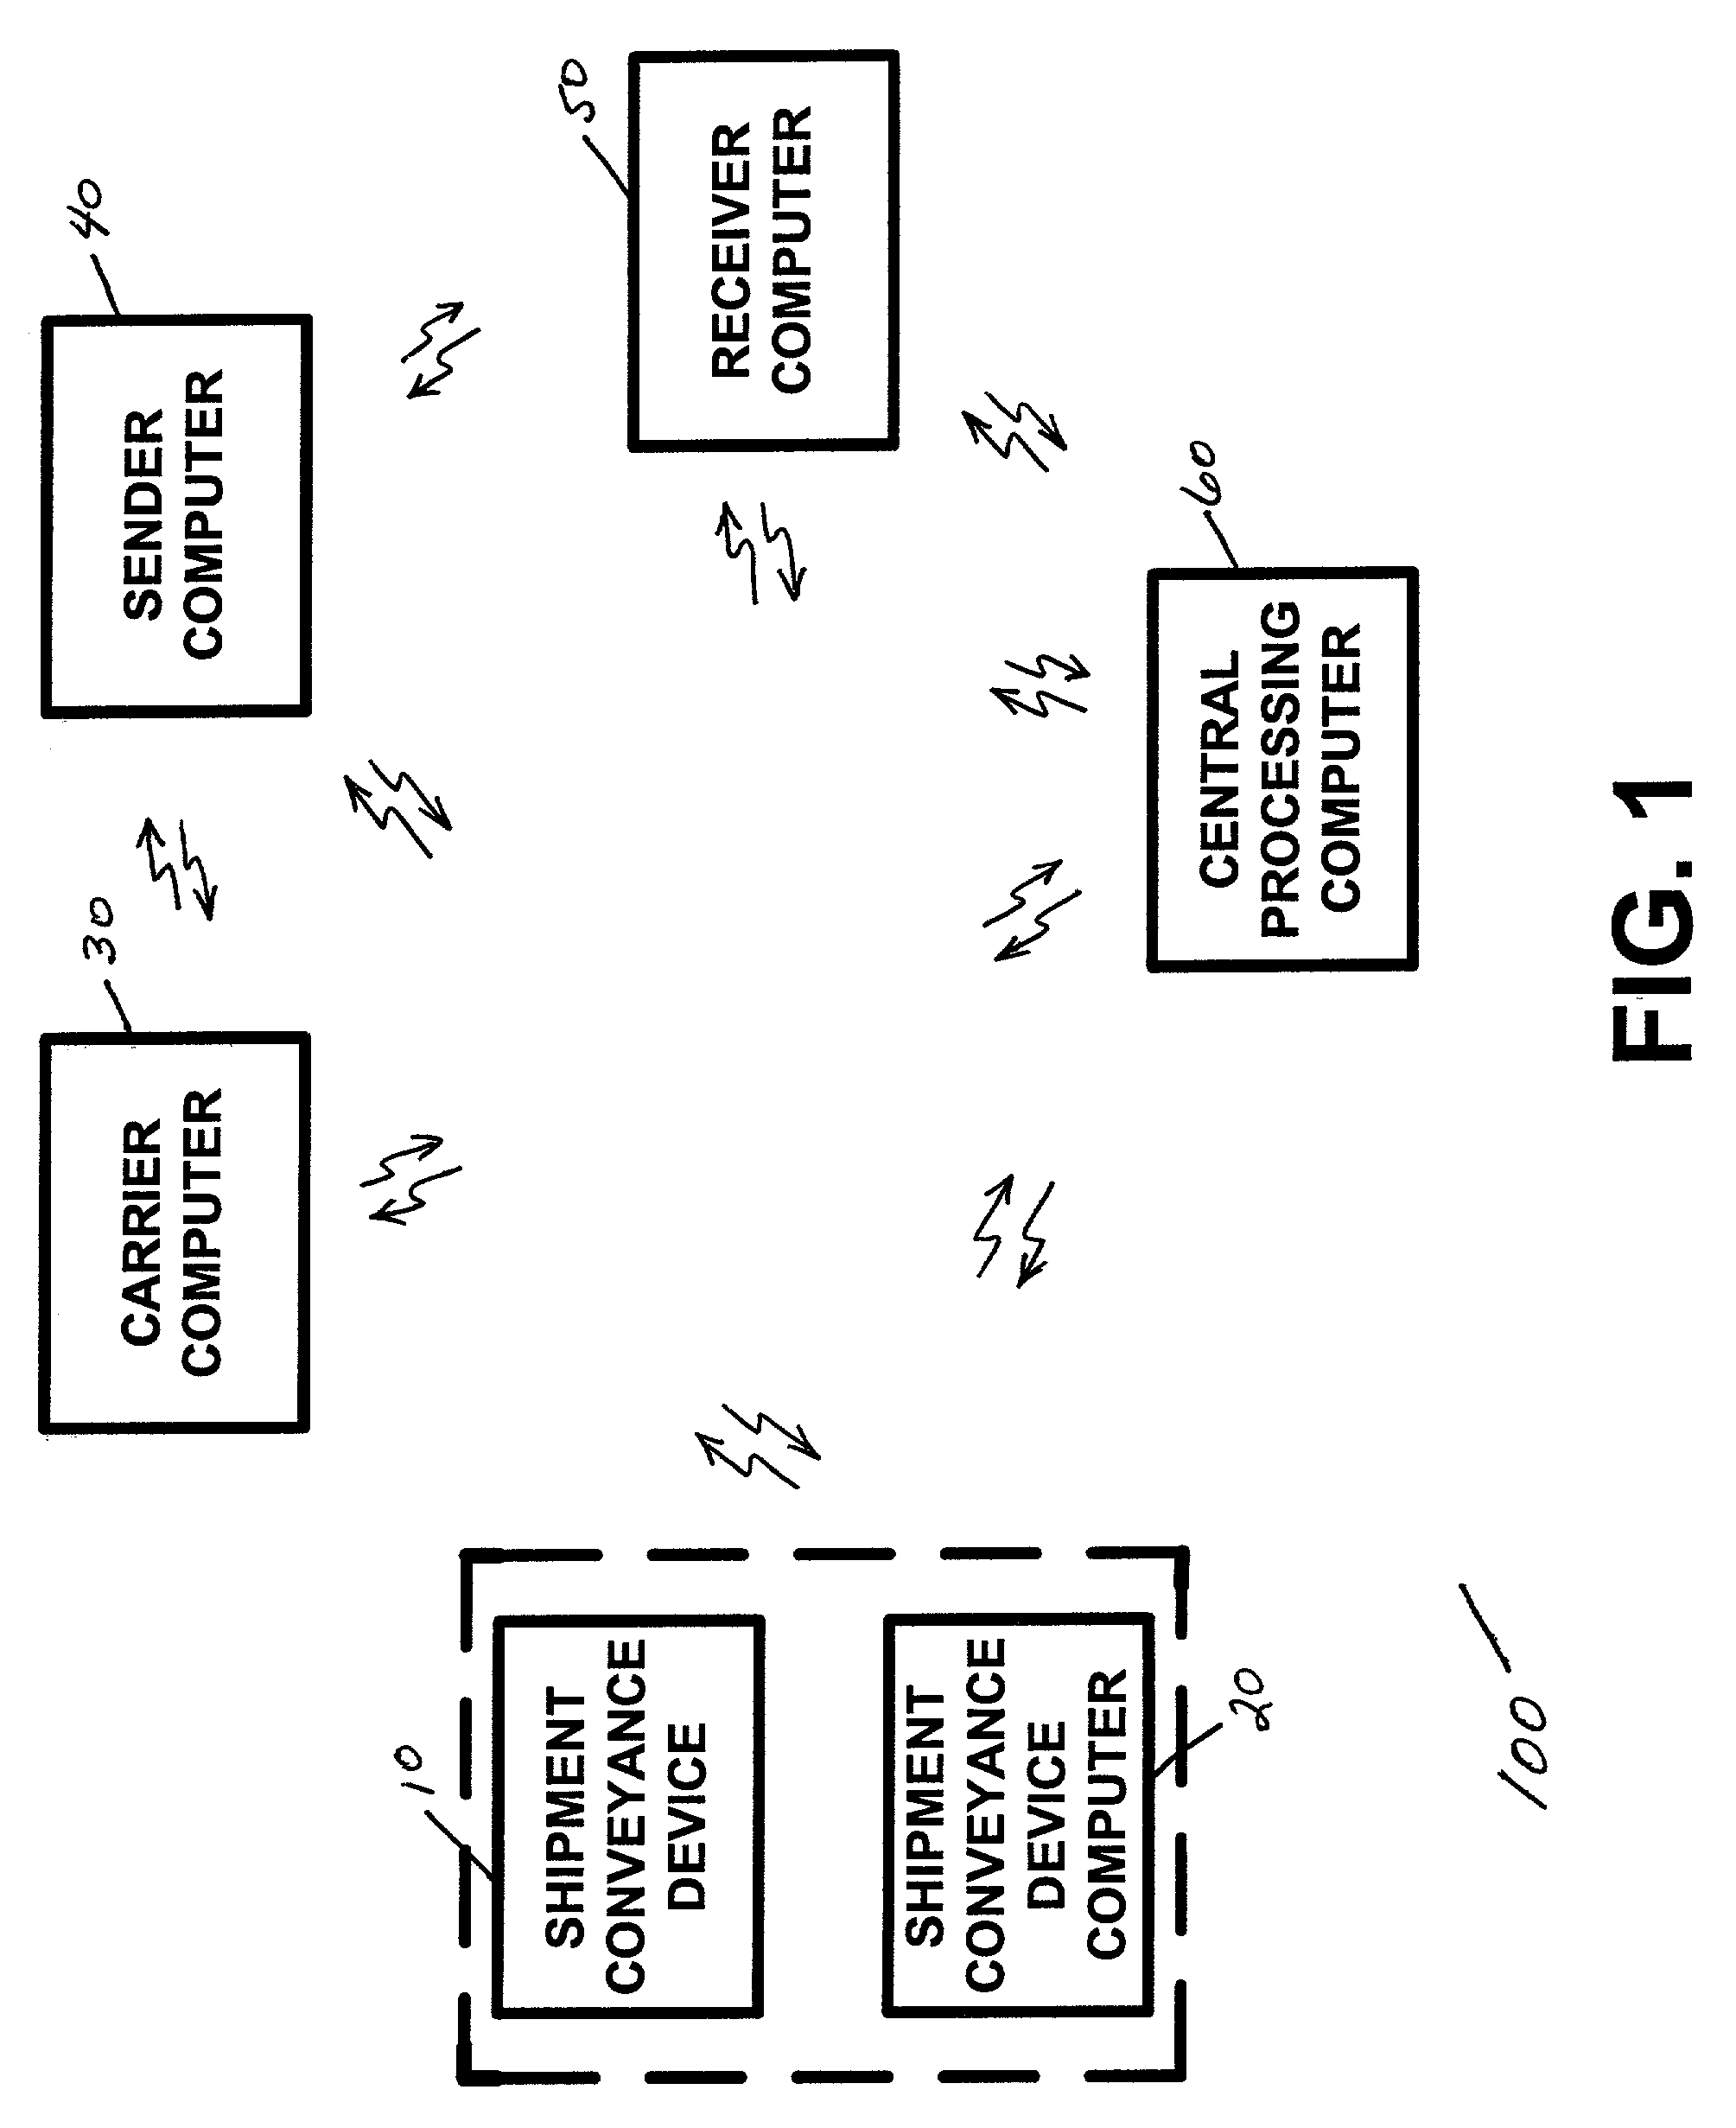 Apparatus and method for providing shipment information